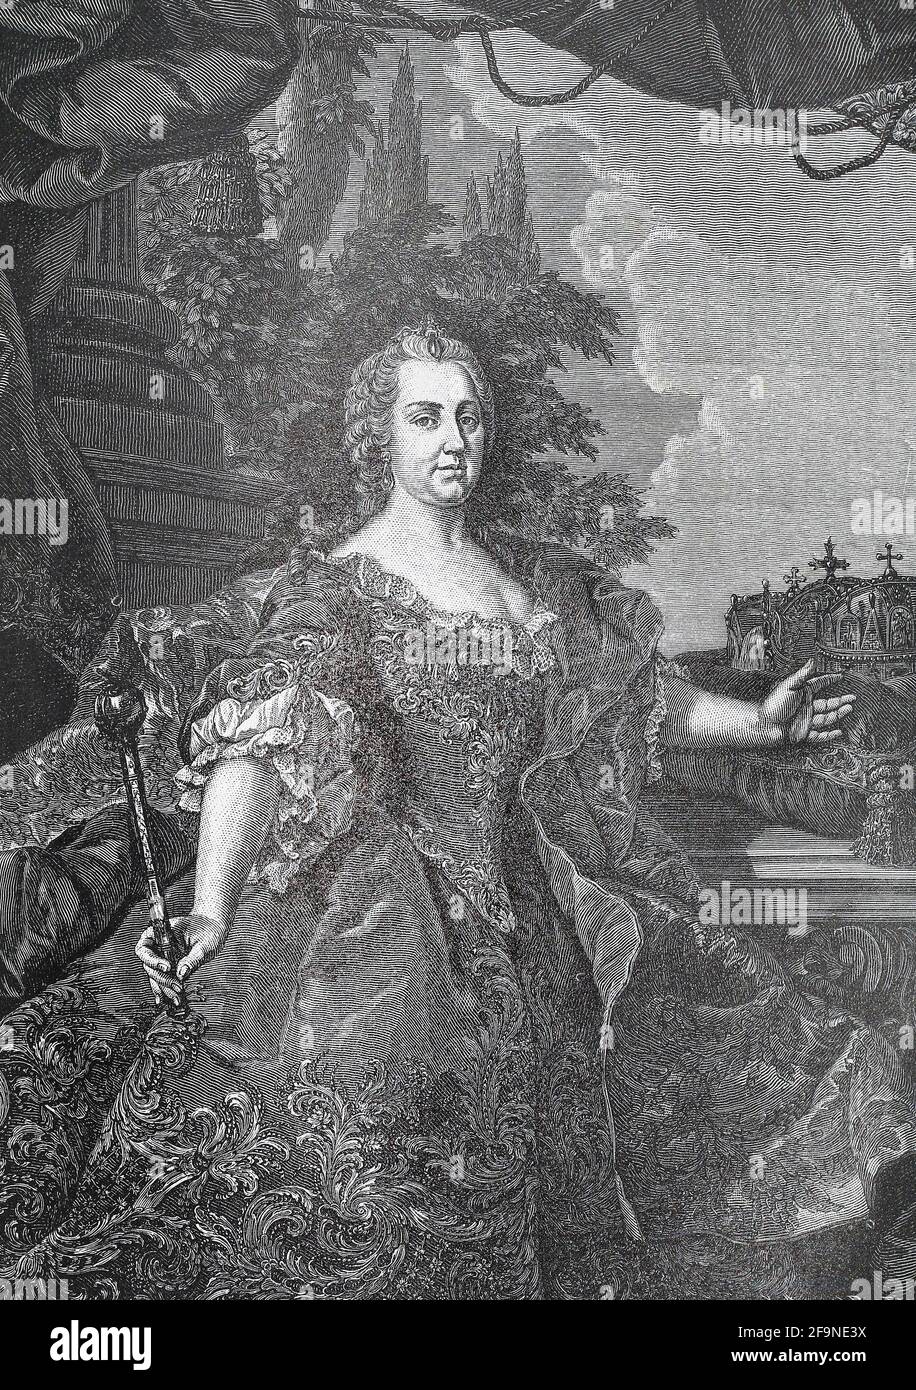 Maria Theresa Walburga Amalia Christina (Maria Theresia; 13 May 1717 – 29 November 1780) was the only female ruler of the Habsburg dominions, ruling from 1740 until her death in 1780. She was the sovereign of Austria, Hungary, Croatia, Bohemia, Transylvania, Mantua, Milan, Lodomeria and Galicia, the Austrian Netherlands, and Parma. By marriage, she was Duchess of Lorraine, Grand Duchess of Tuscany and Holy Roman Empress. Stock Photo